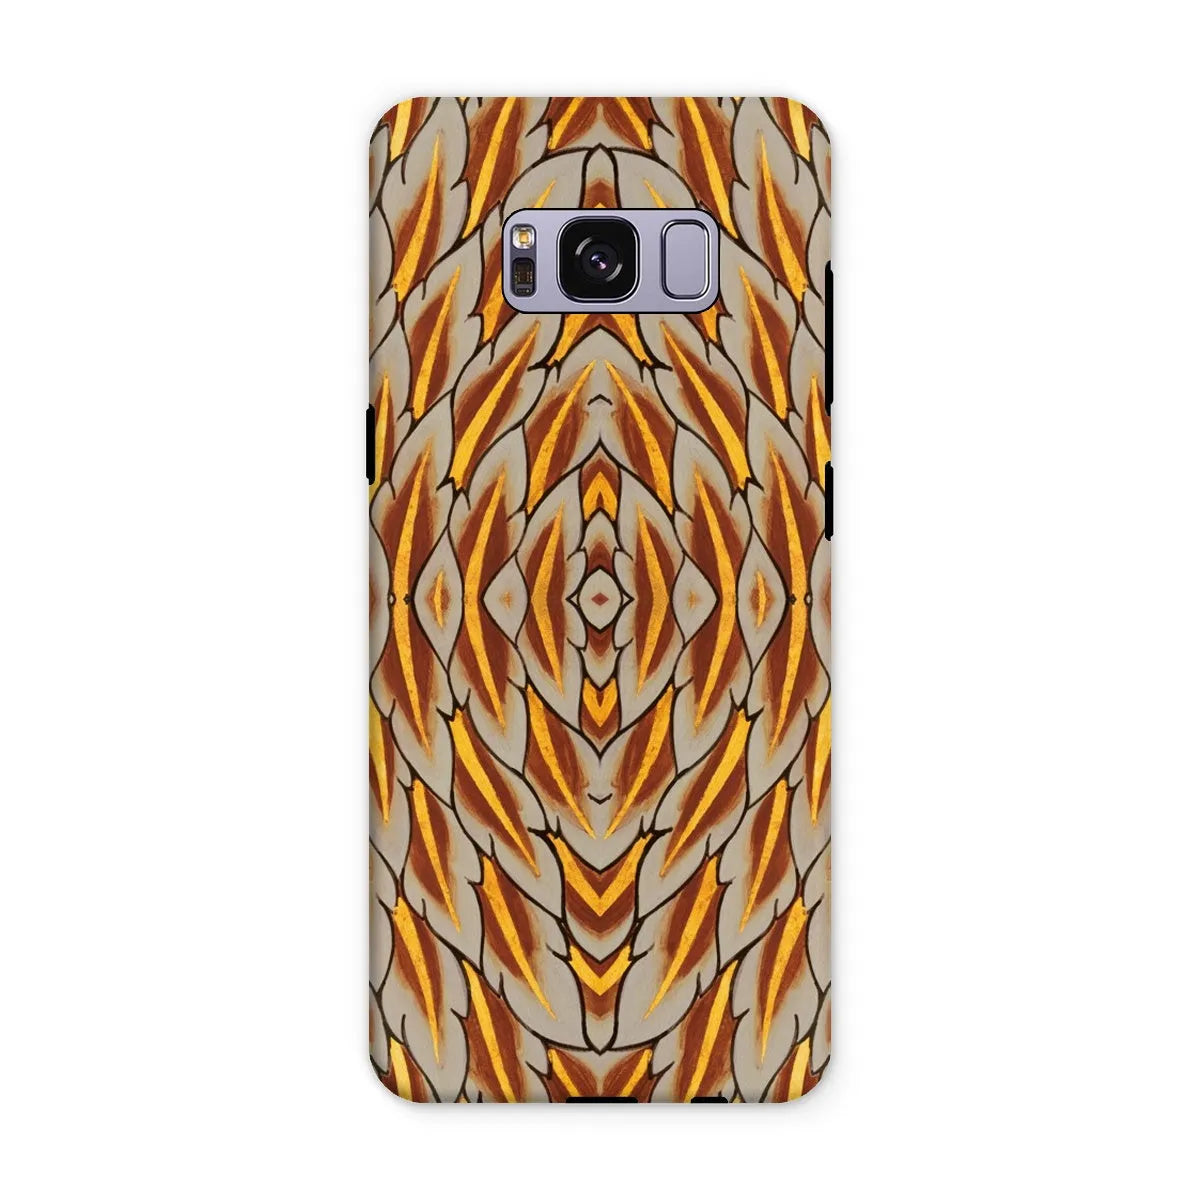 Featherweight Champion Thai Aesthetic Art Phone Case - Samsung Galaxy S8 Plus / Matte - Mobile Phone Cases - Aesthetic